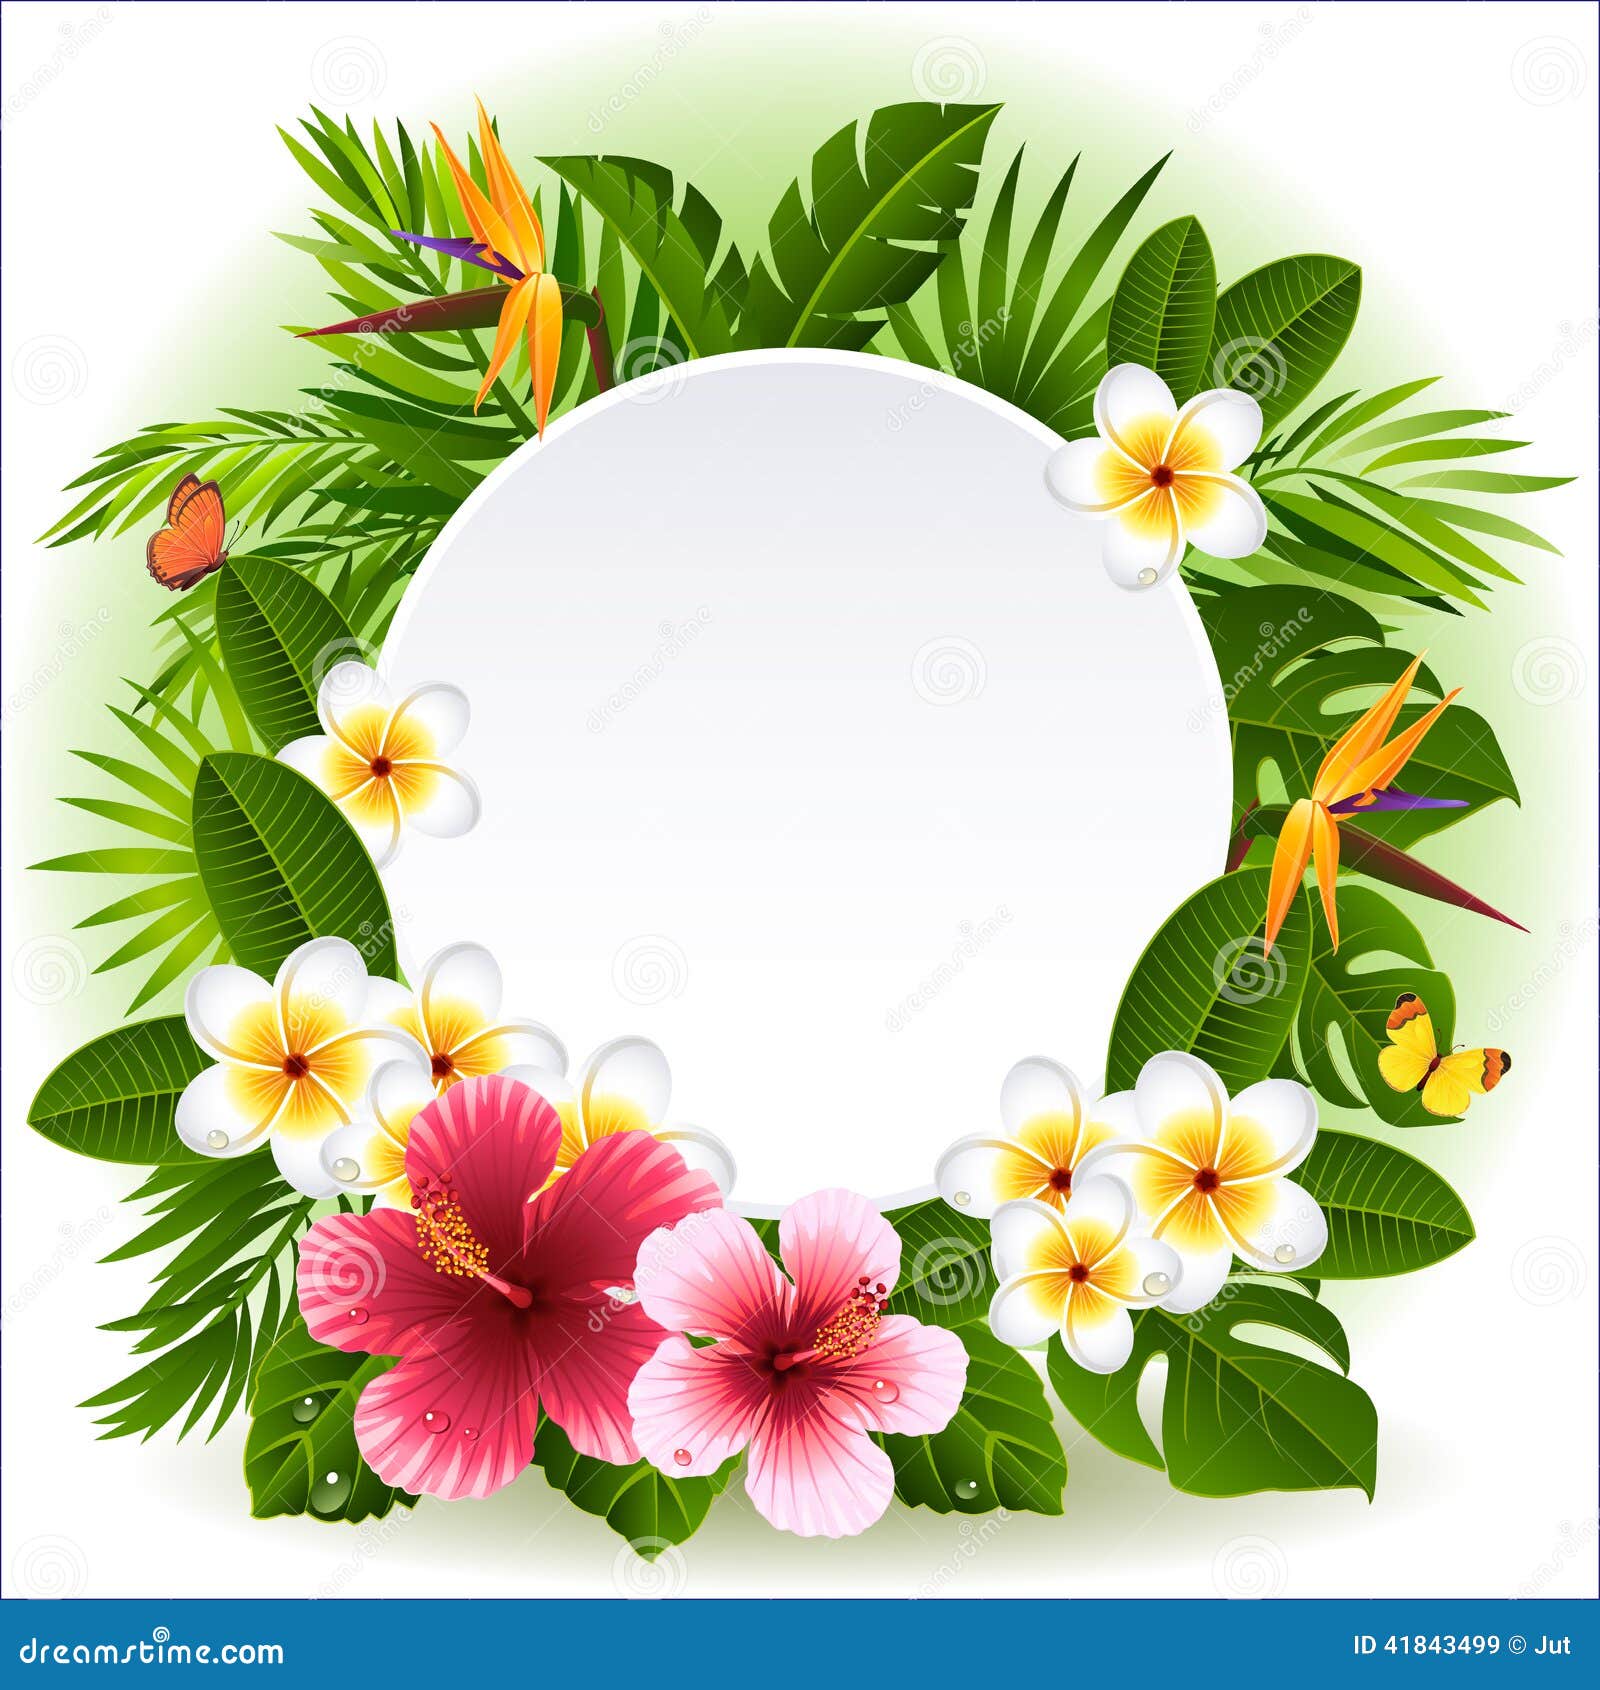 Tropical flowers stock vector. Illustration of green ...